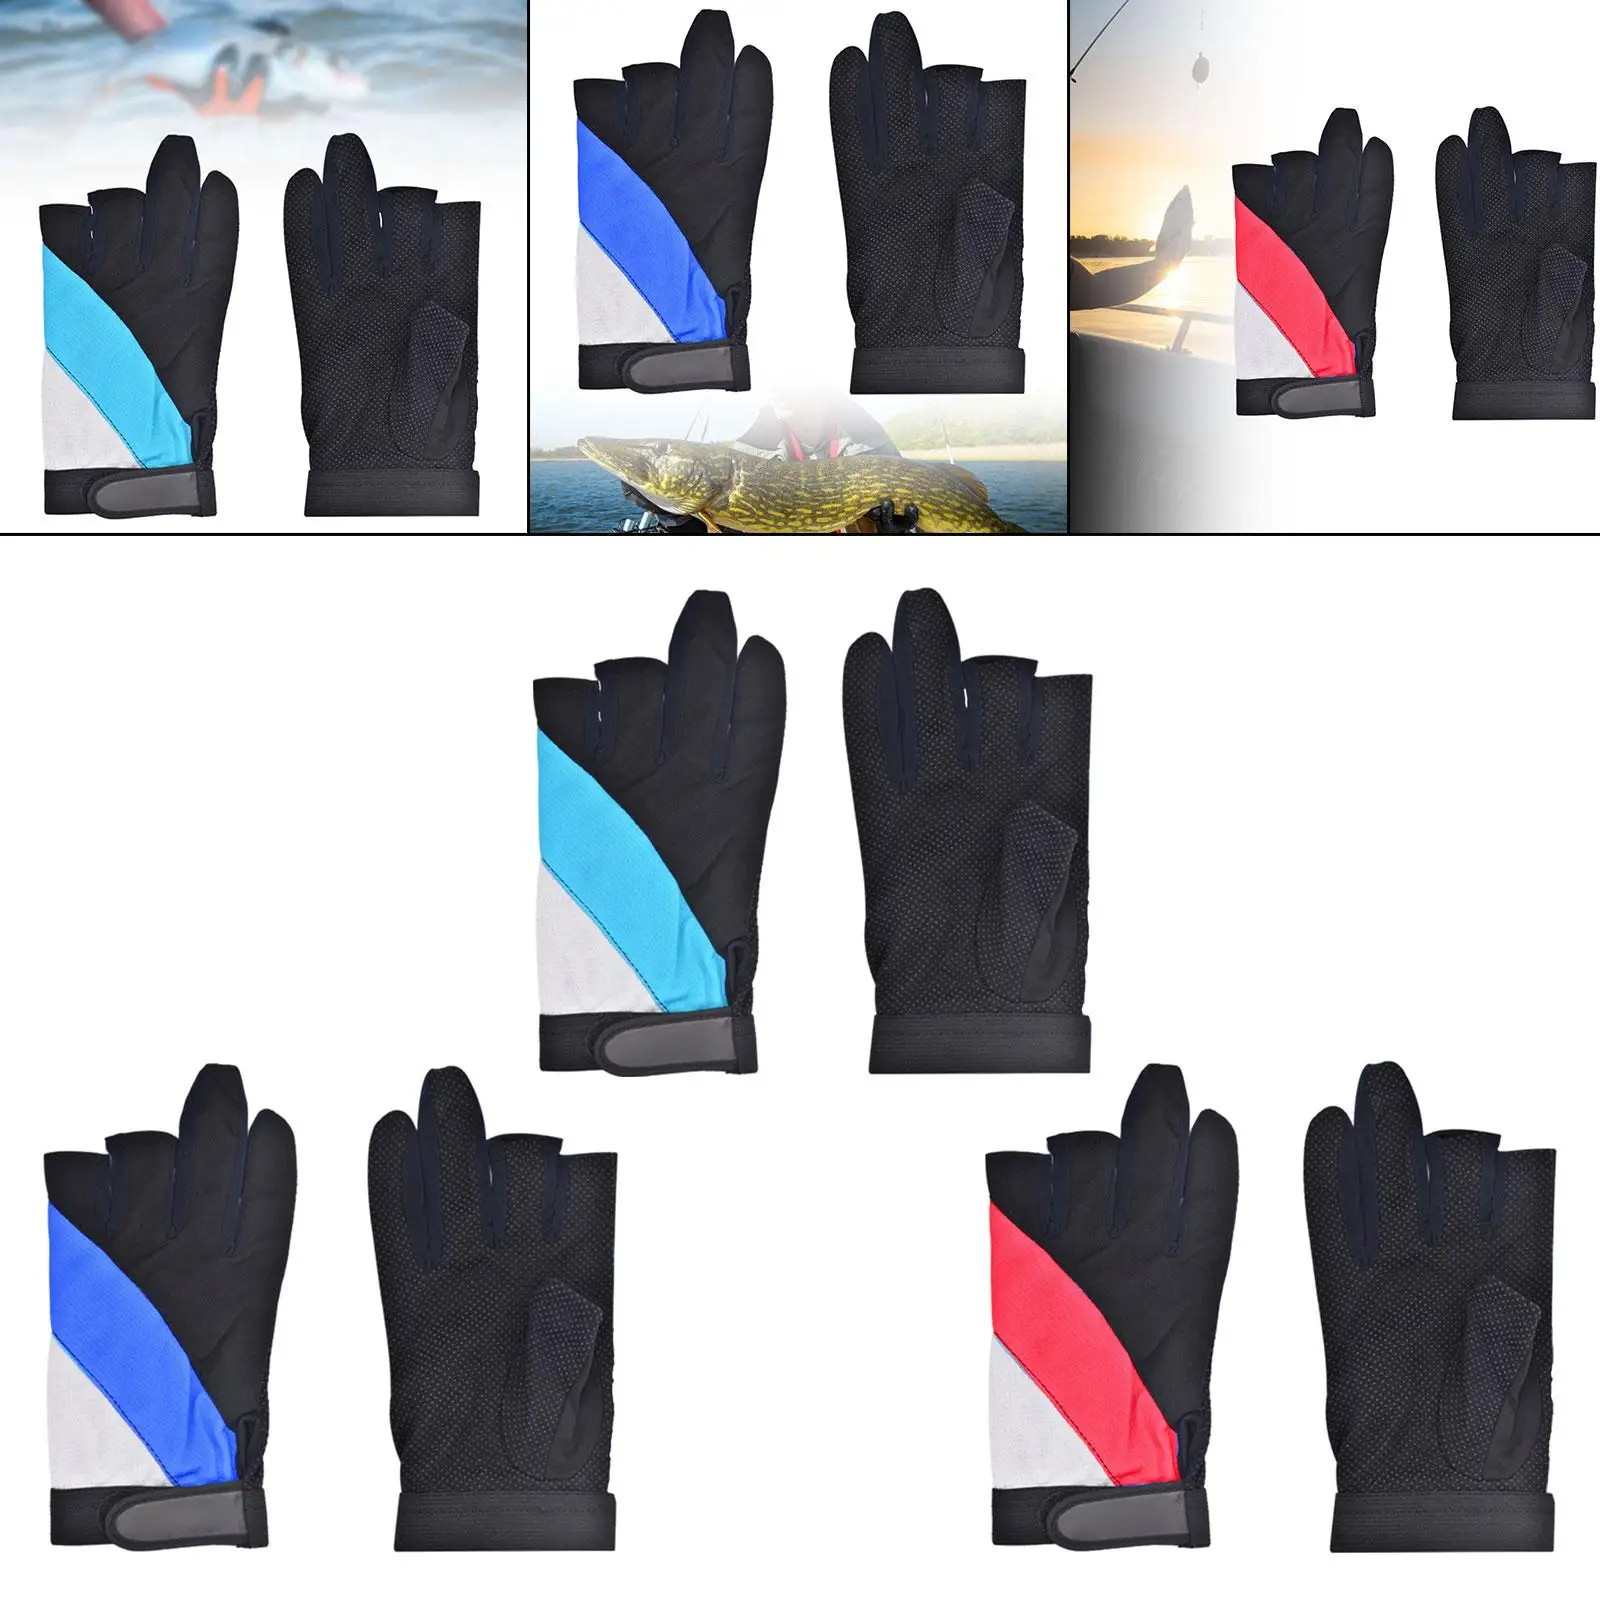 3 Cut Fingers Gloves Finger Protector Gloves for Camping Hiking Outdoor